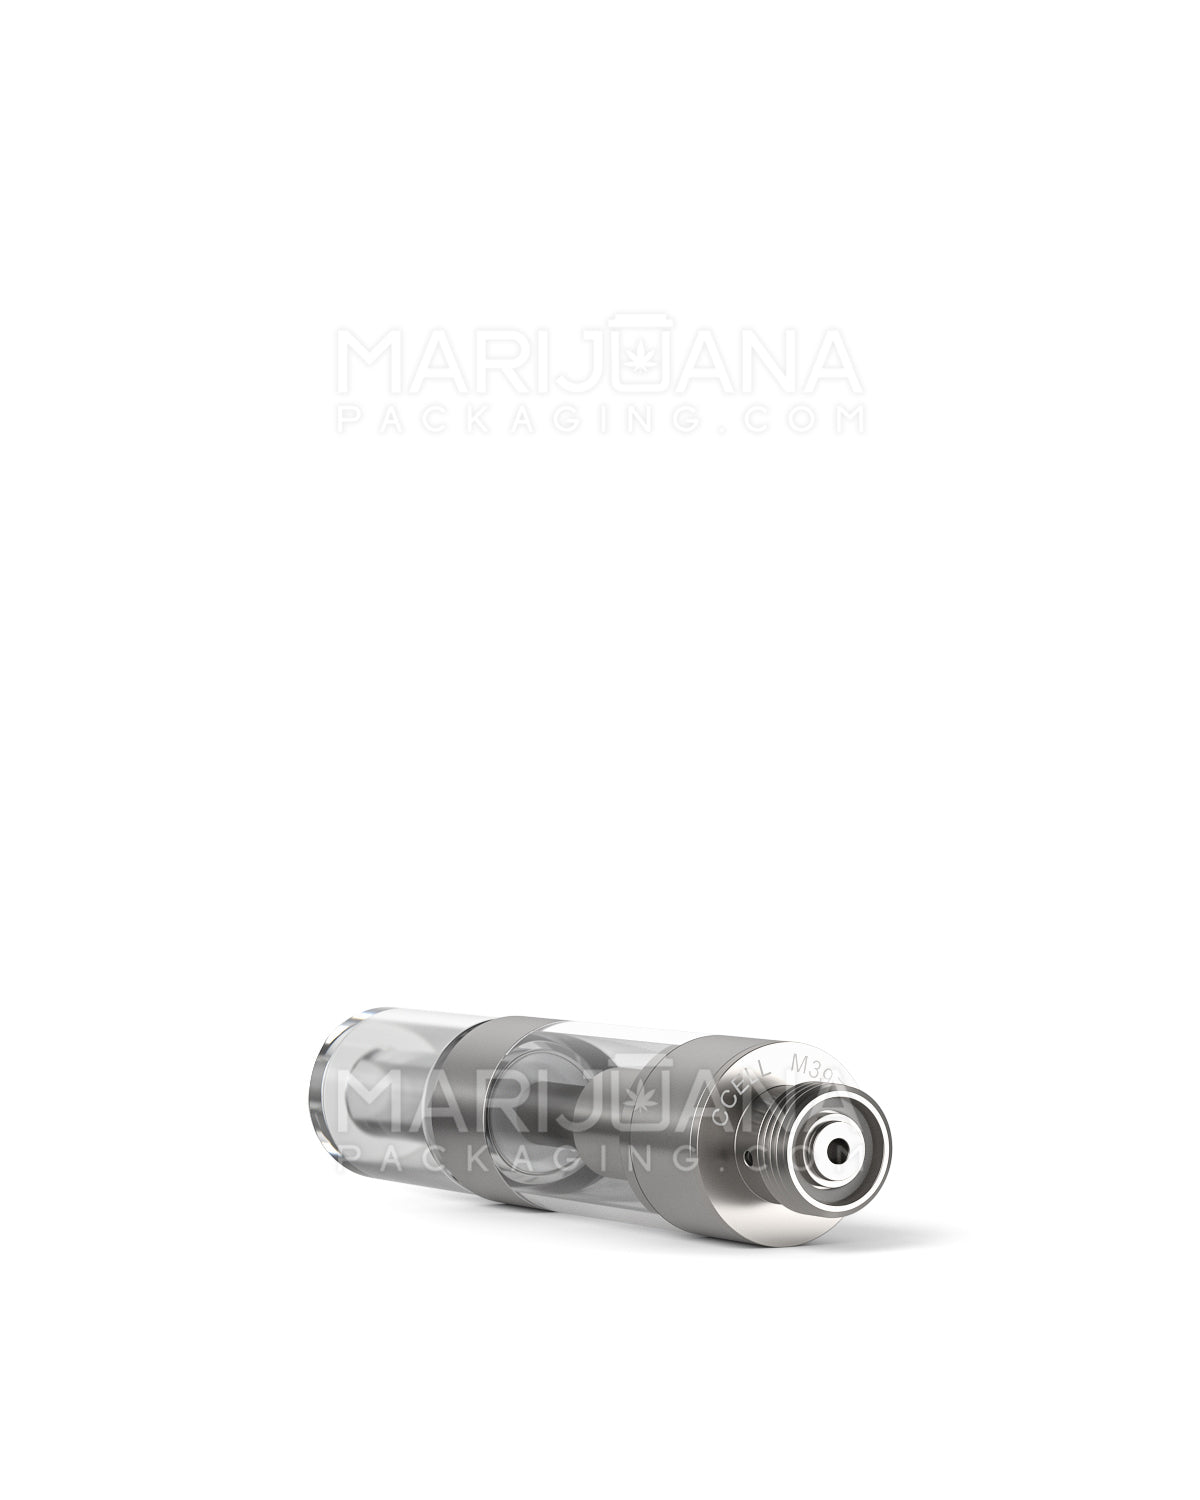 CCELL | Liquid6 Reactor Plastic Vape Cartridge with Barrel Clear Plastic Mouthpiece | 0.5mL - Press On - 100 Count - 7